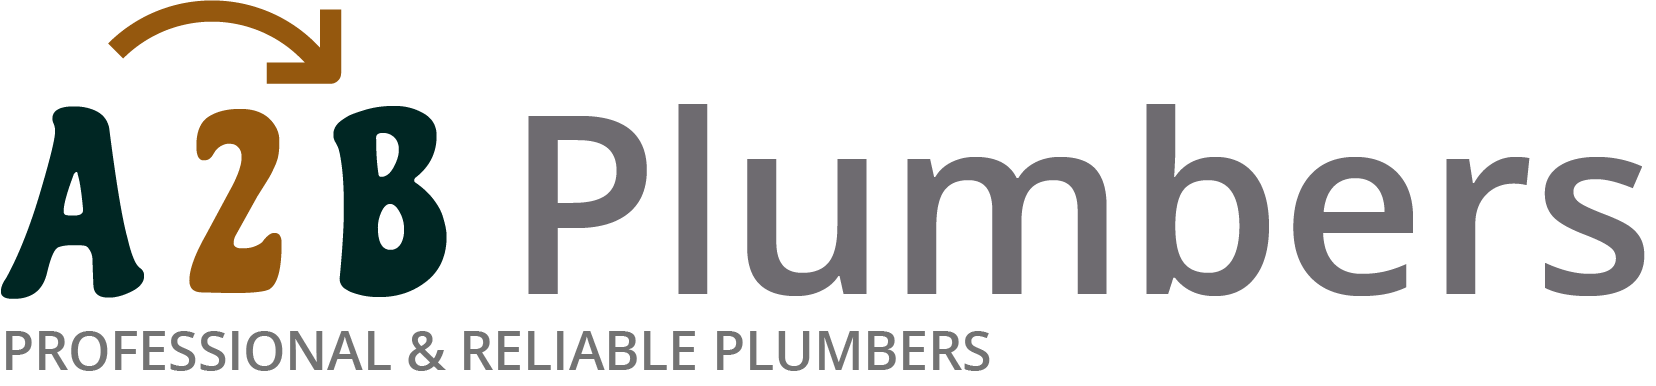 If you need a boiler installed, a radiator repaired or a leaking tap fixed, call us now - we provide services for properties in Biddulph and the local area.